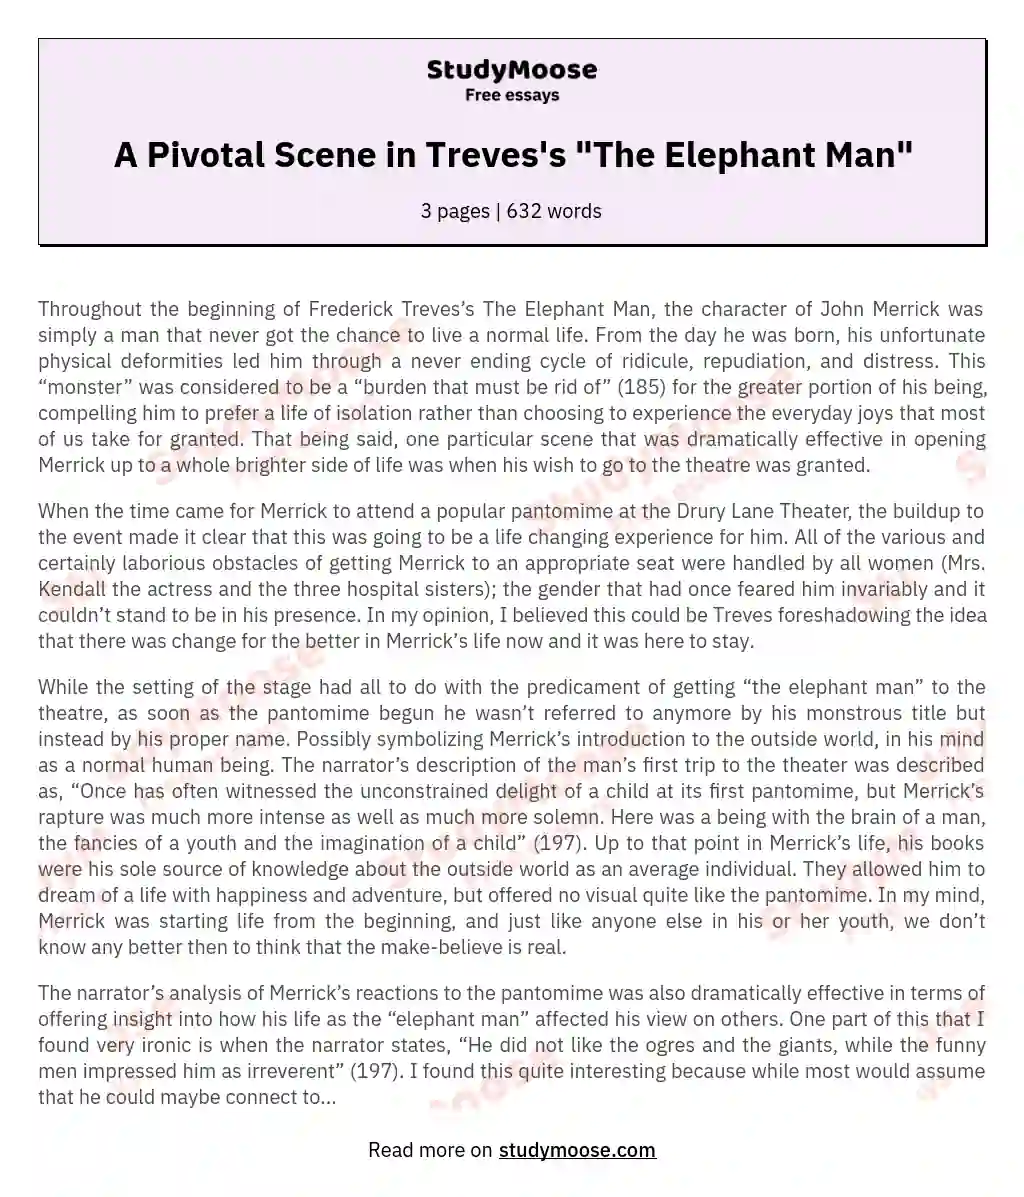 A Pivotal Scene in Treves's "The Elephant Man" essay